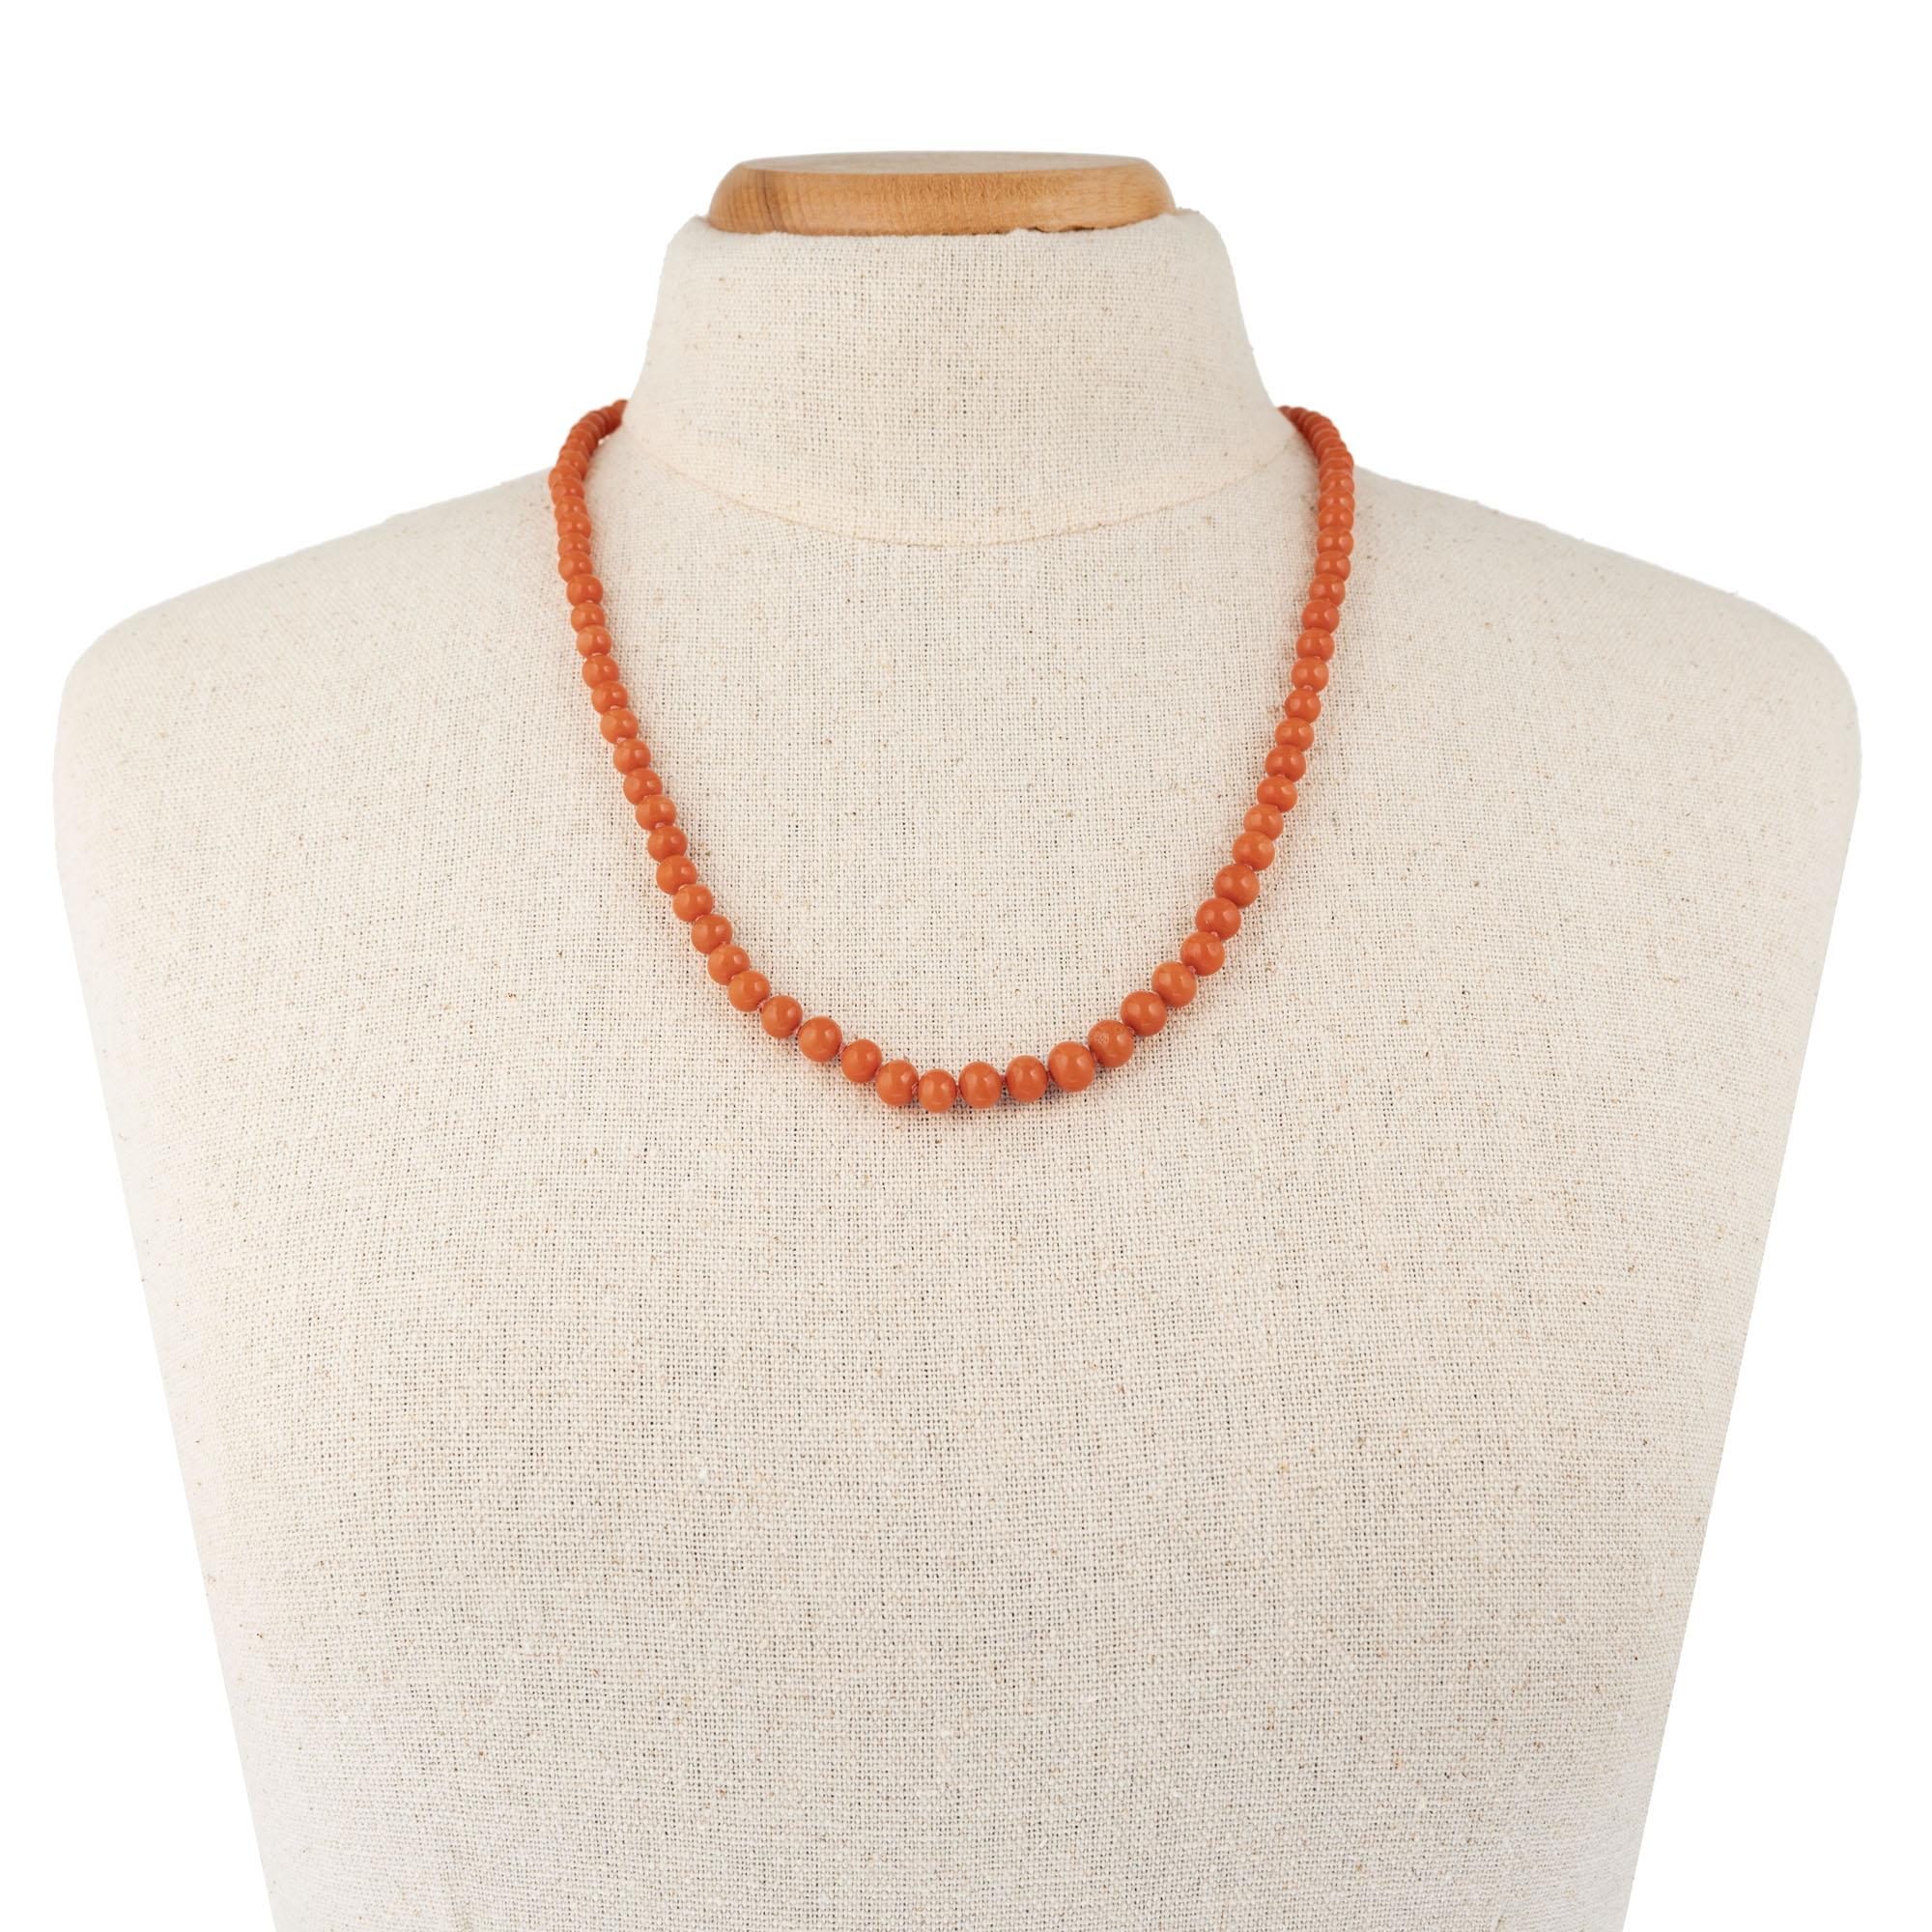 Victorian circa 1900. Well-polished native shape round Victorian natural untreated reddish orange Coral necklace. Freshly strung. Original 14k rose gold catch.

91 well-polished slightly irregular natural Coral beads 7.5 to 5.3mm. GIA certified